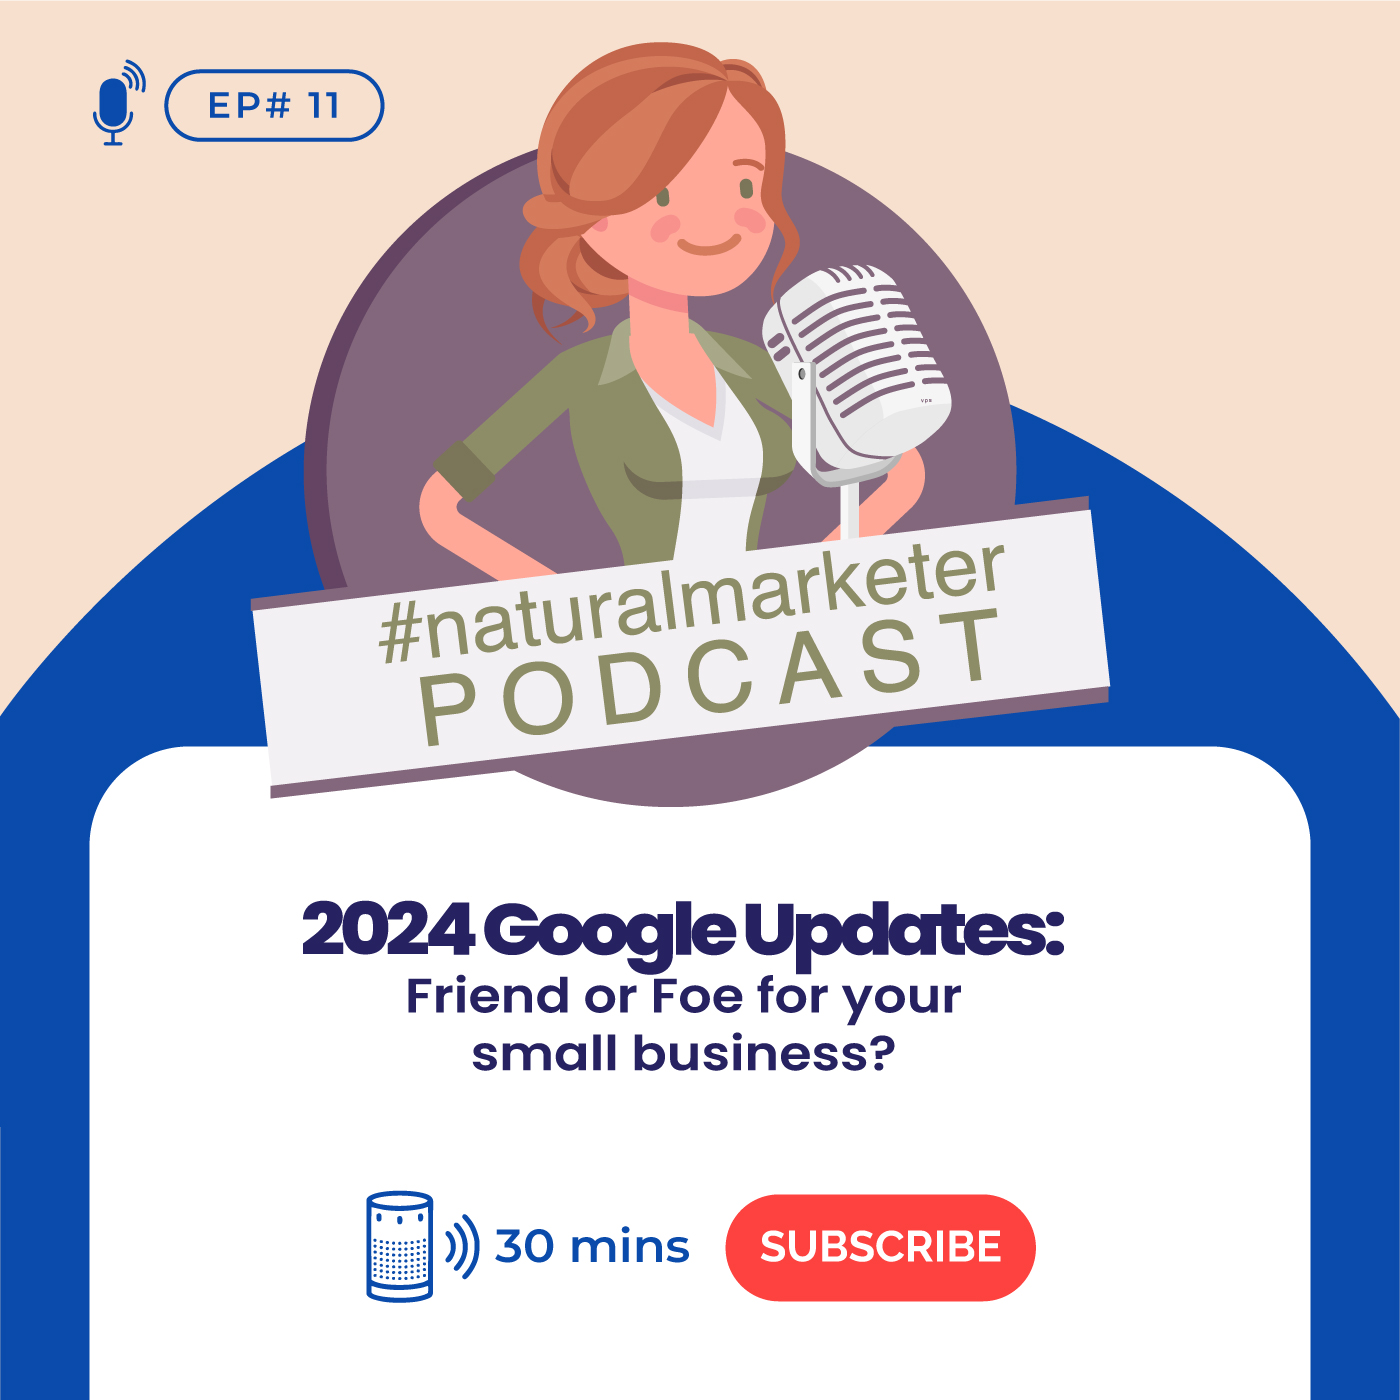 Episode 11: Google's Core Update and Features for Small Businesses